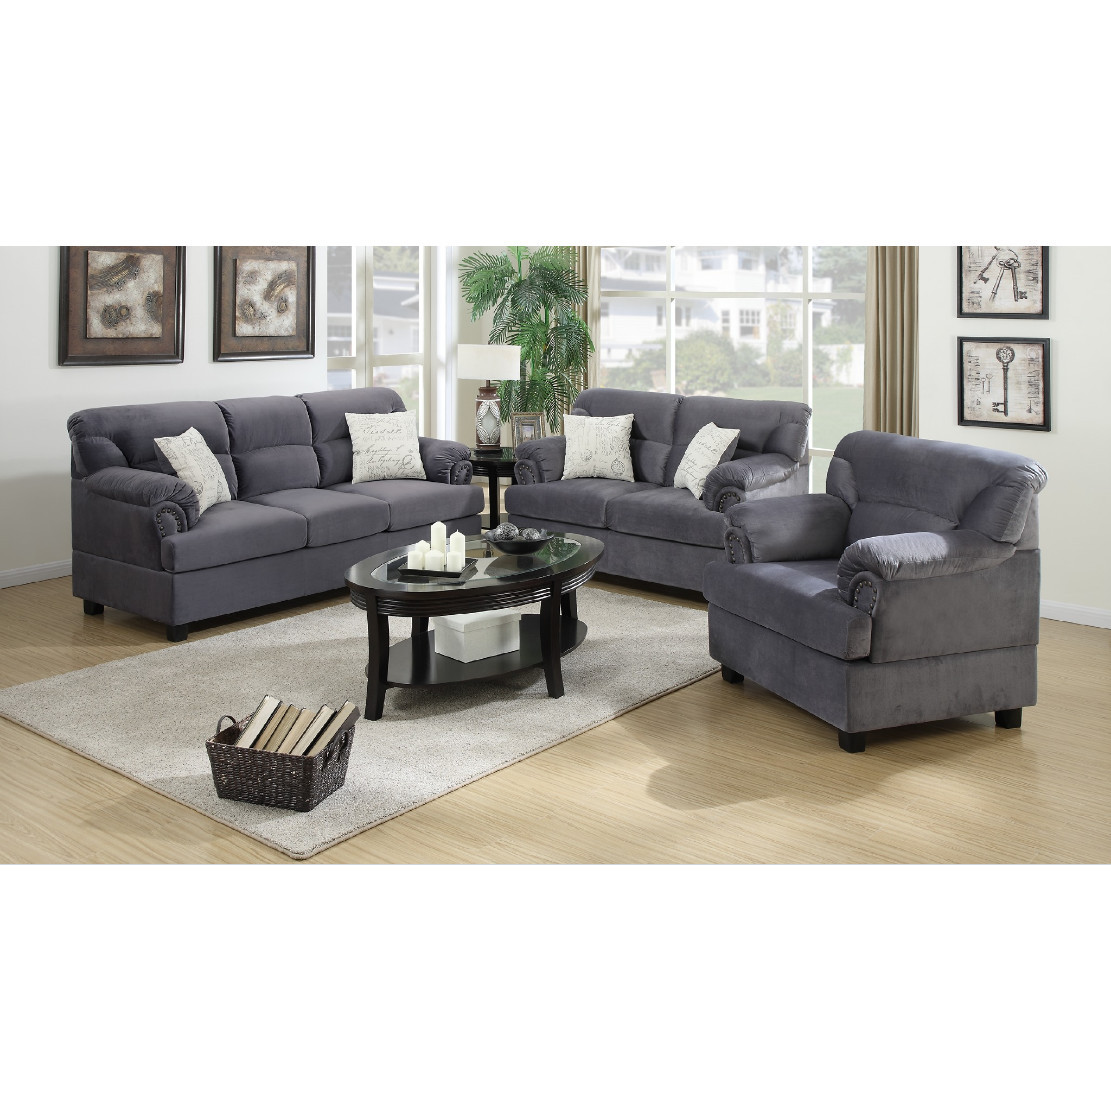 Best ideas about 3 Piece Living Room Set
. Save or Pin A&J Homes Studio Penny 3 Piece Living Room Set Now.